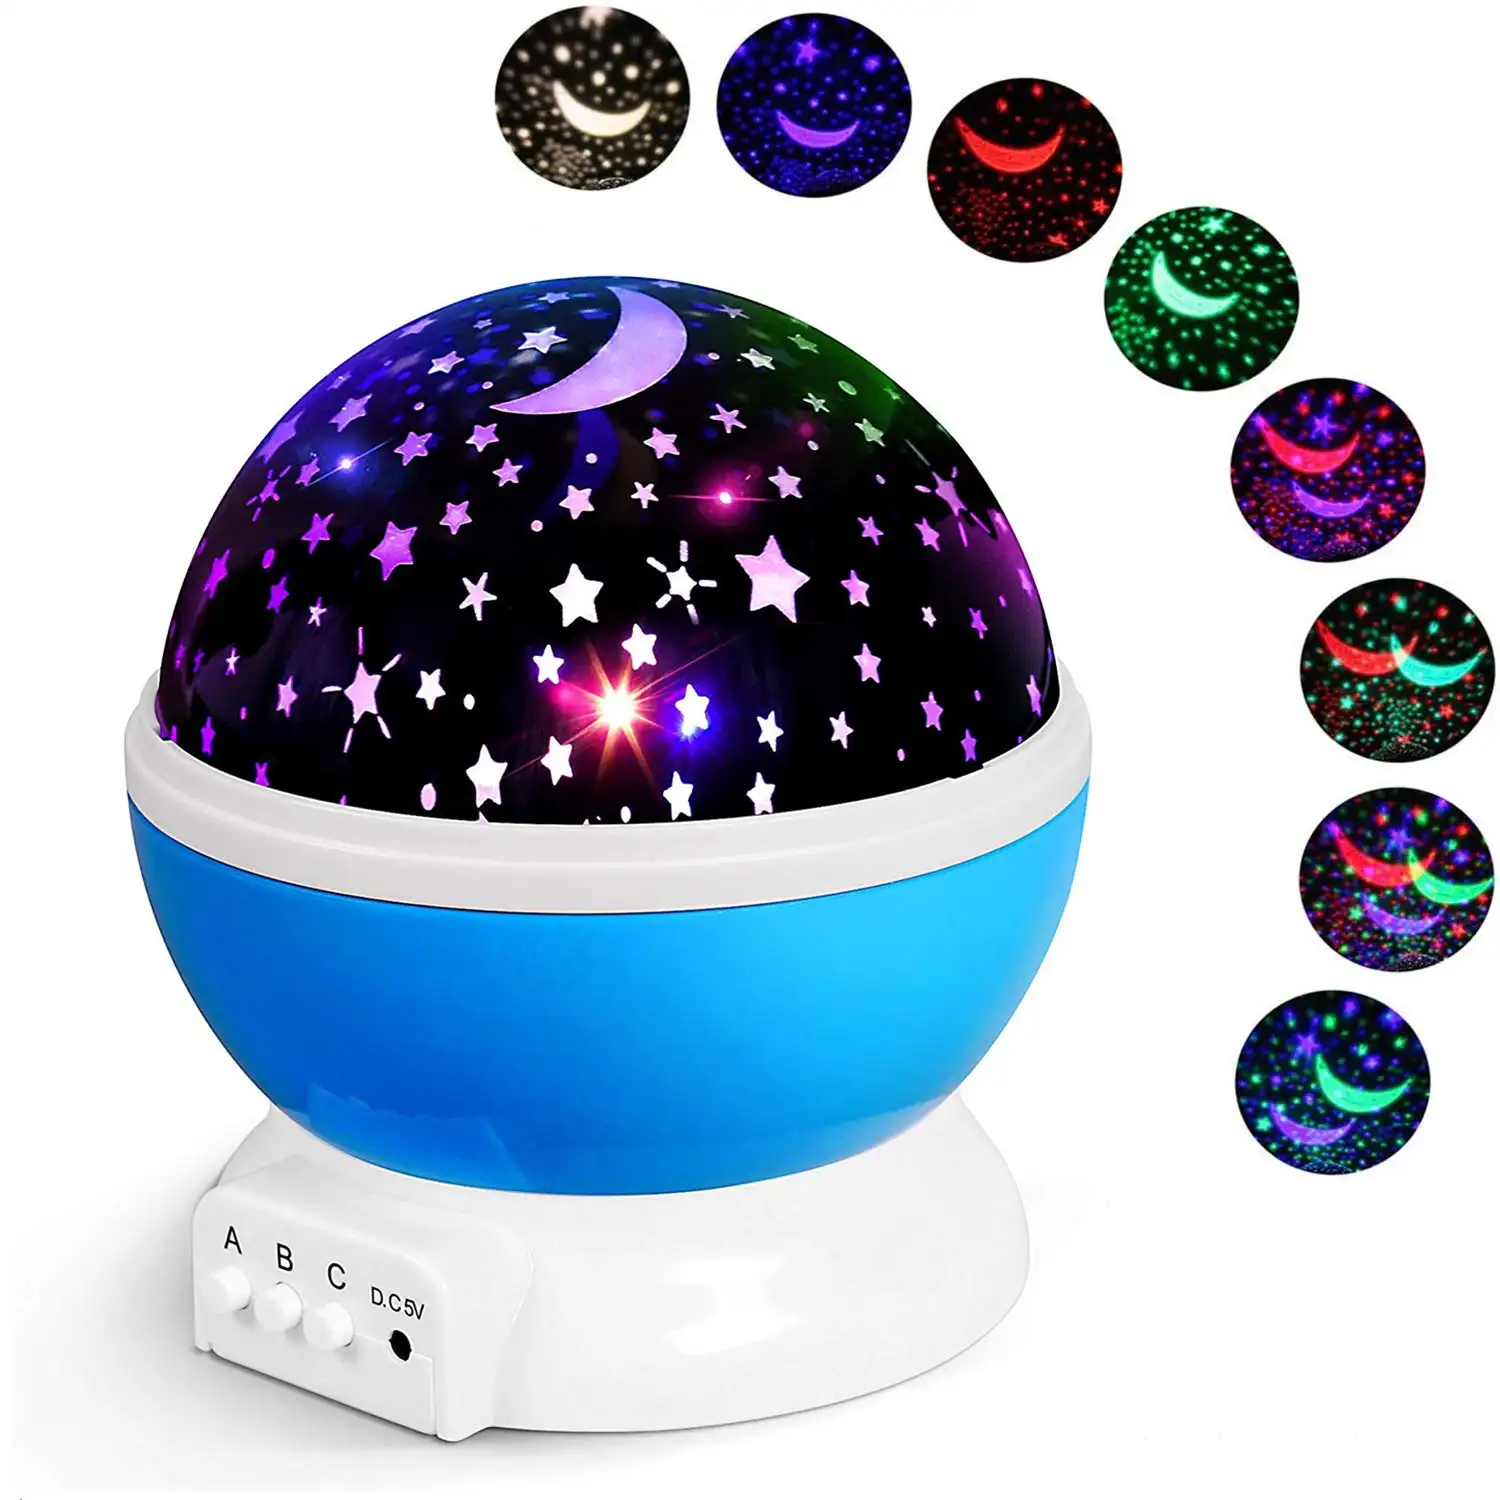 360 Degree Rotating Laser Led Colorful Dream Moon star night light projector for bedroom